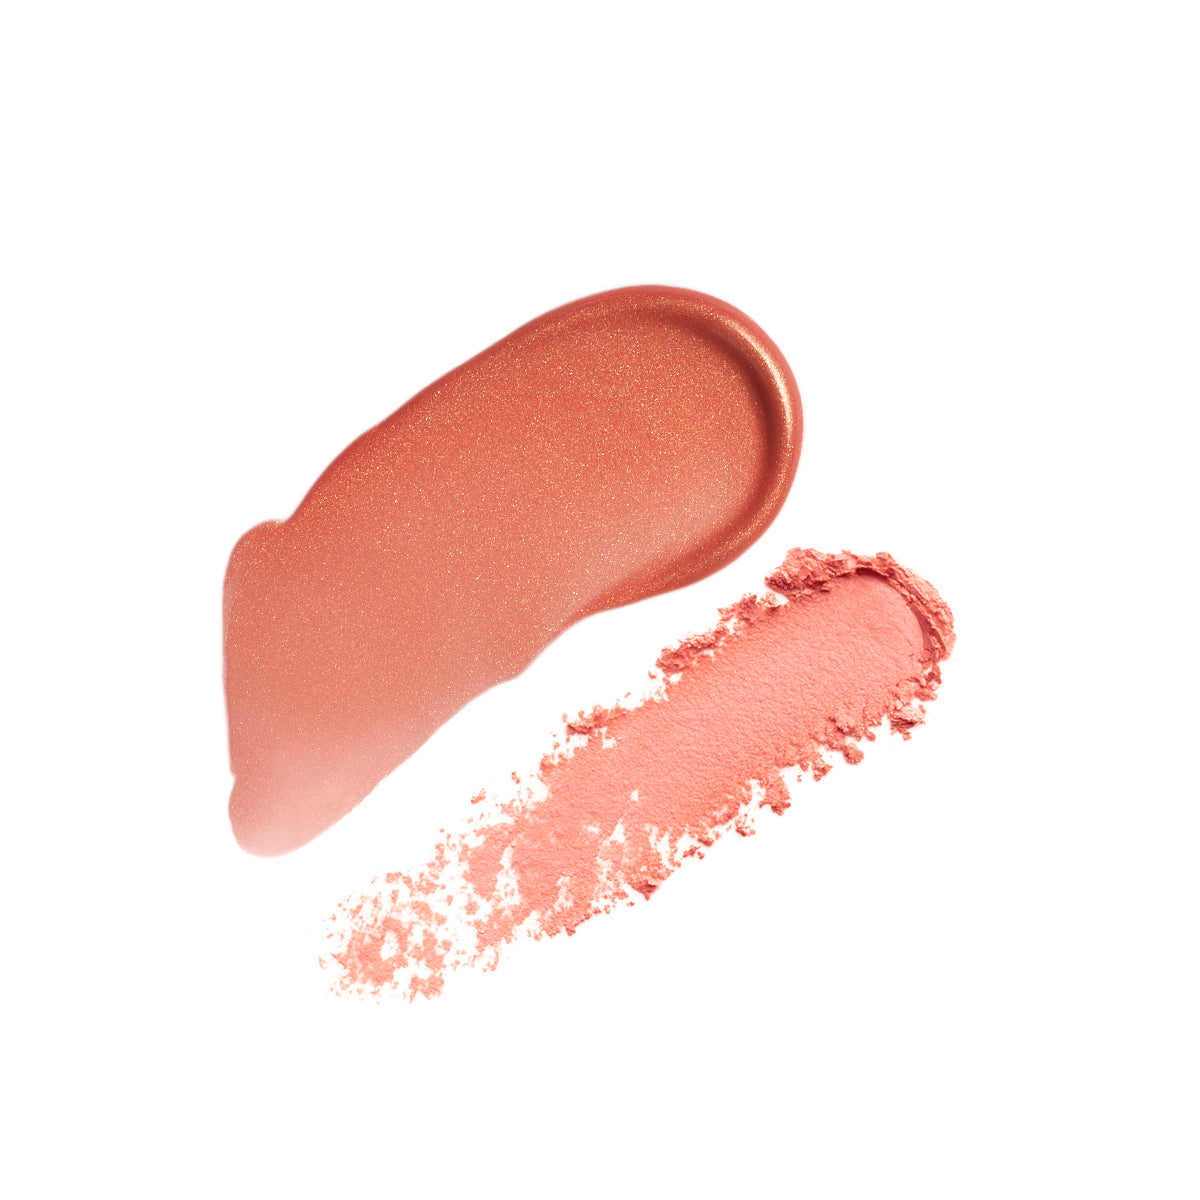 PARFAIT - PINKY CORAL - swatches of liquid and powder blush in shade parfait